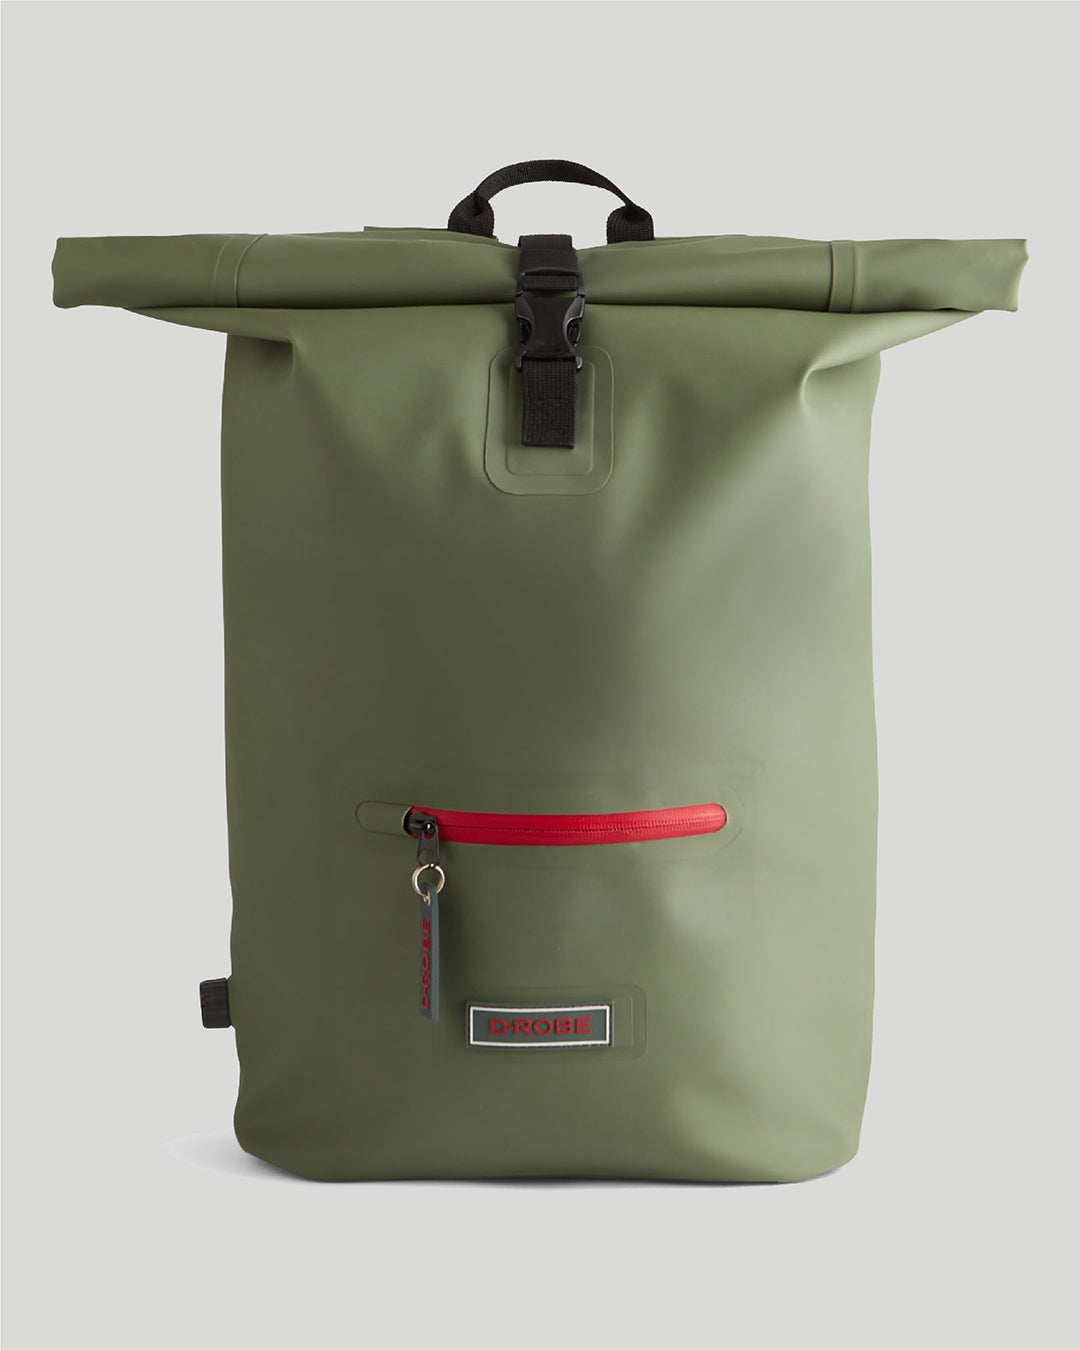 Image of our moss green roll-top rucksack, crafted from TPU - a durable, waterproof, recyclable and biodegradable material.